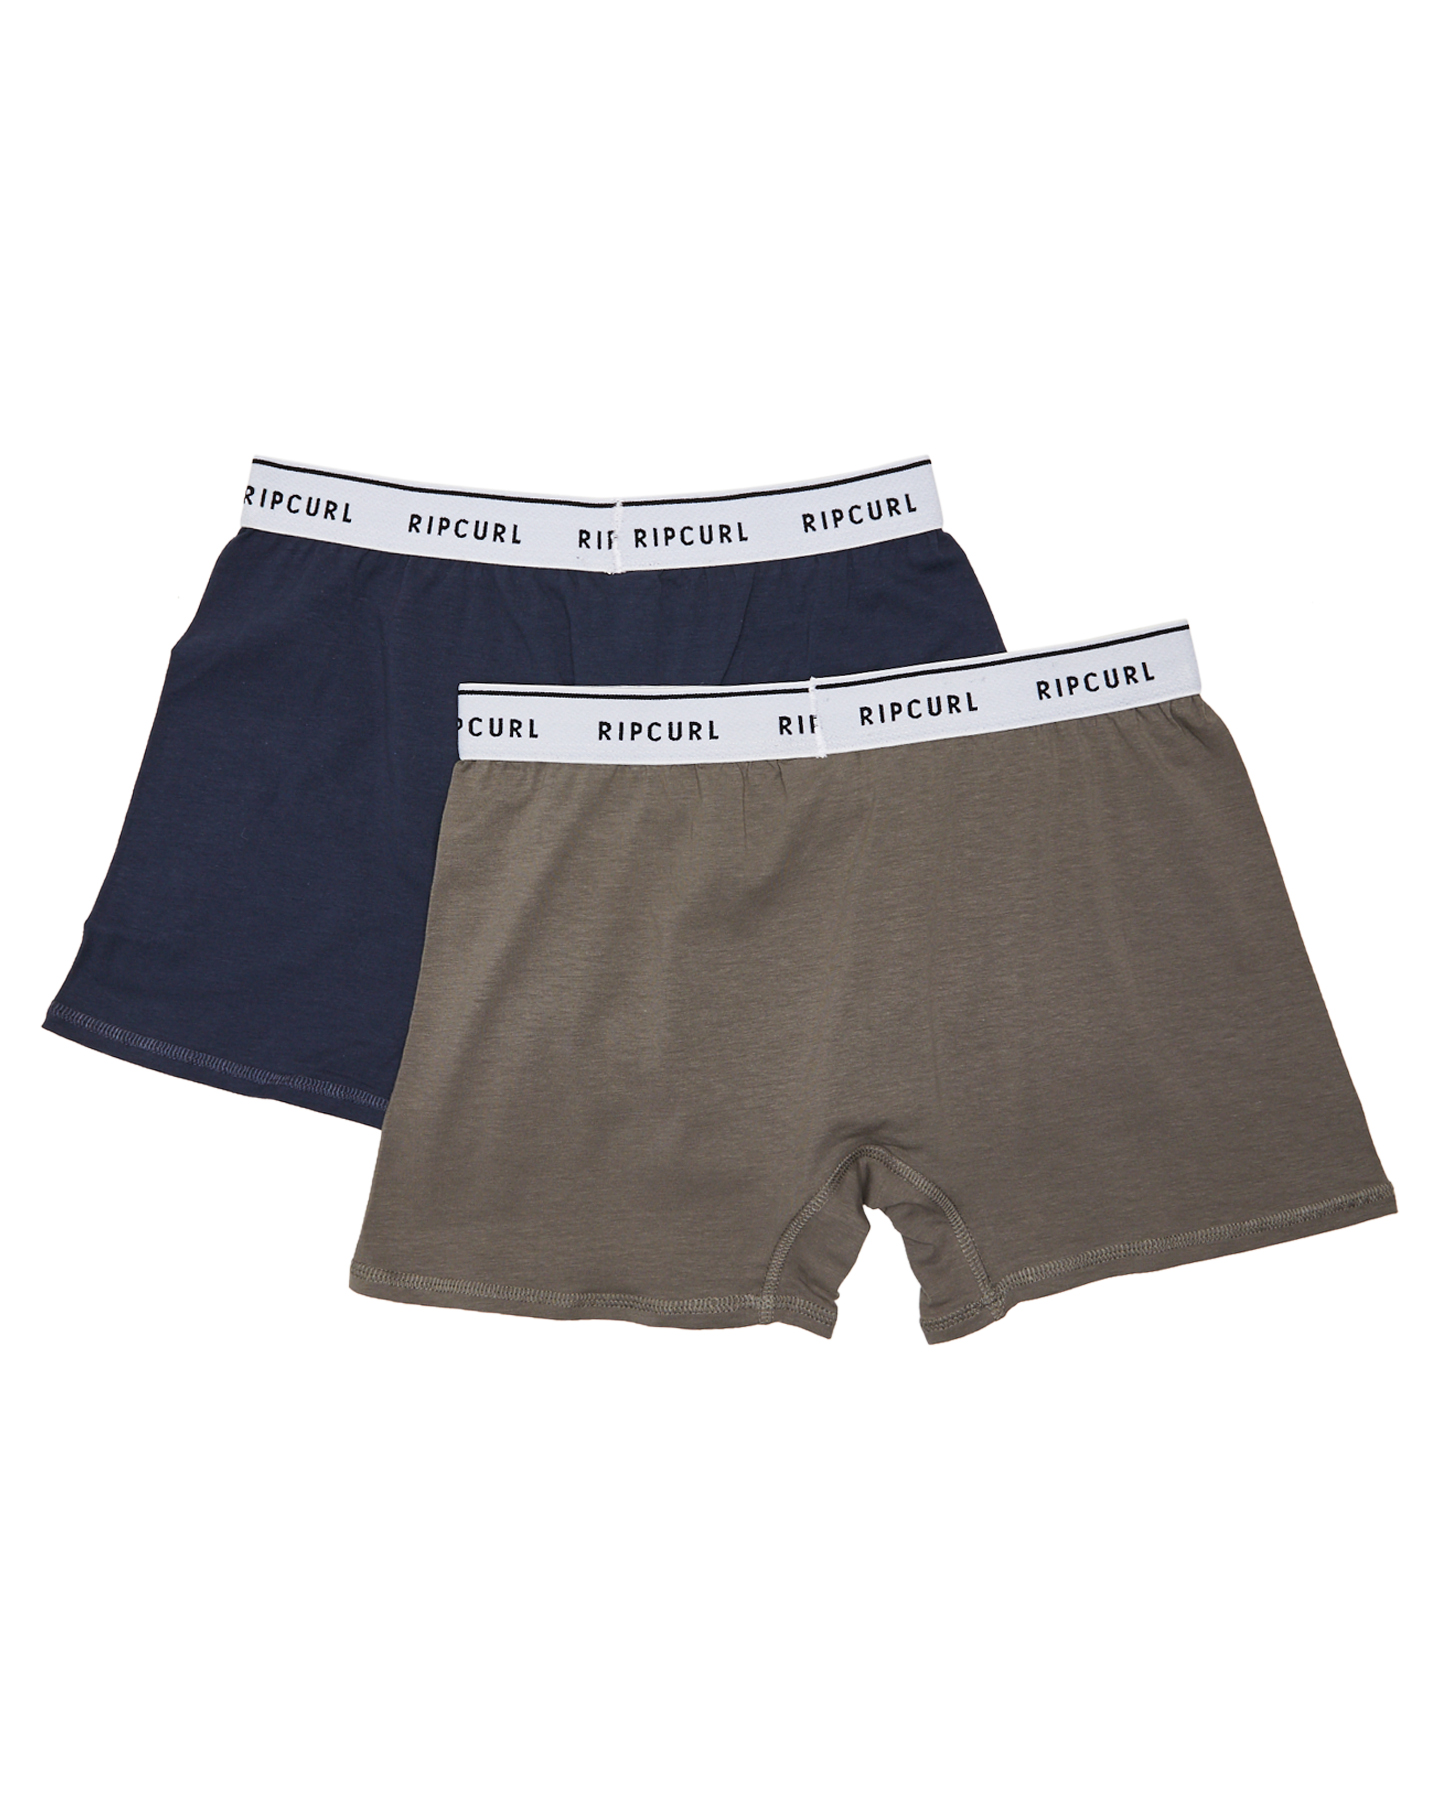 Rip Curl Ripcurl Boxers 2Pk - Navy | SurfStitch